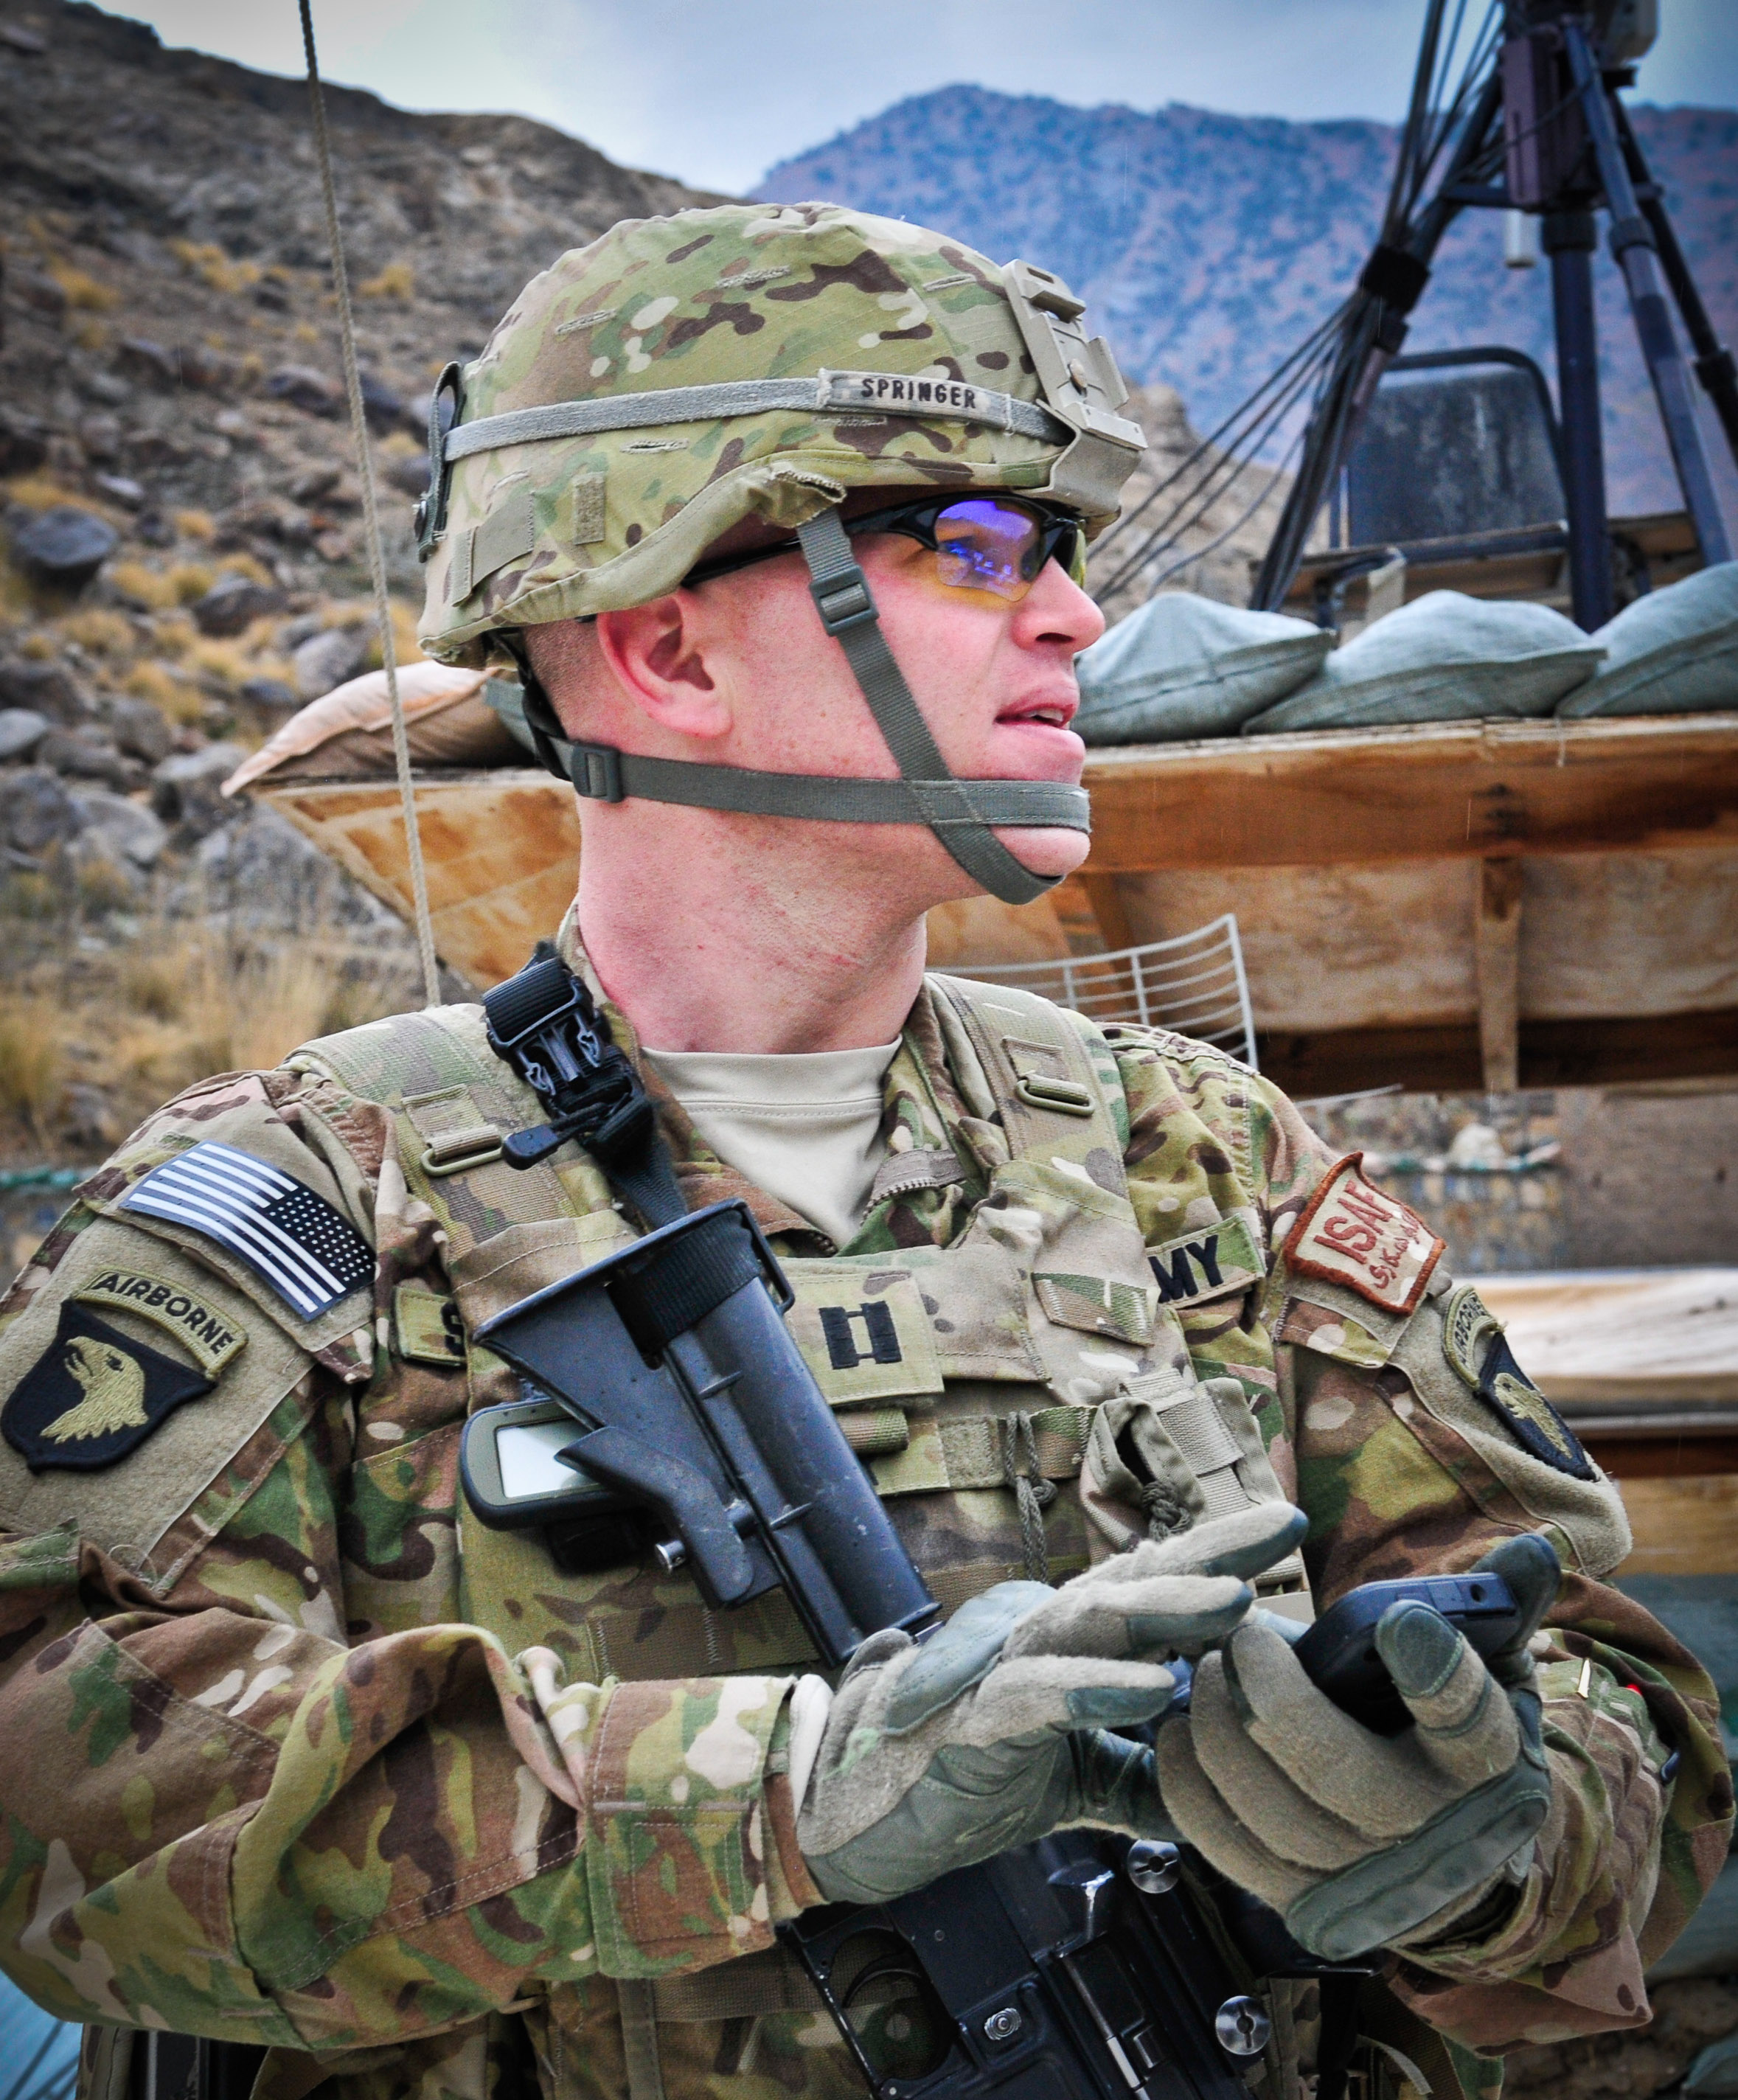 Tactical NAV creator, Capt. Jonathan J. Springer, uses the app during his deployment with the 101st Airborne Division in the Pech Valley, Afghanistan.